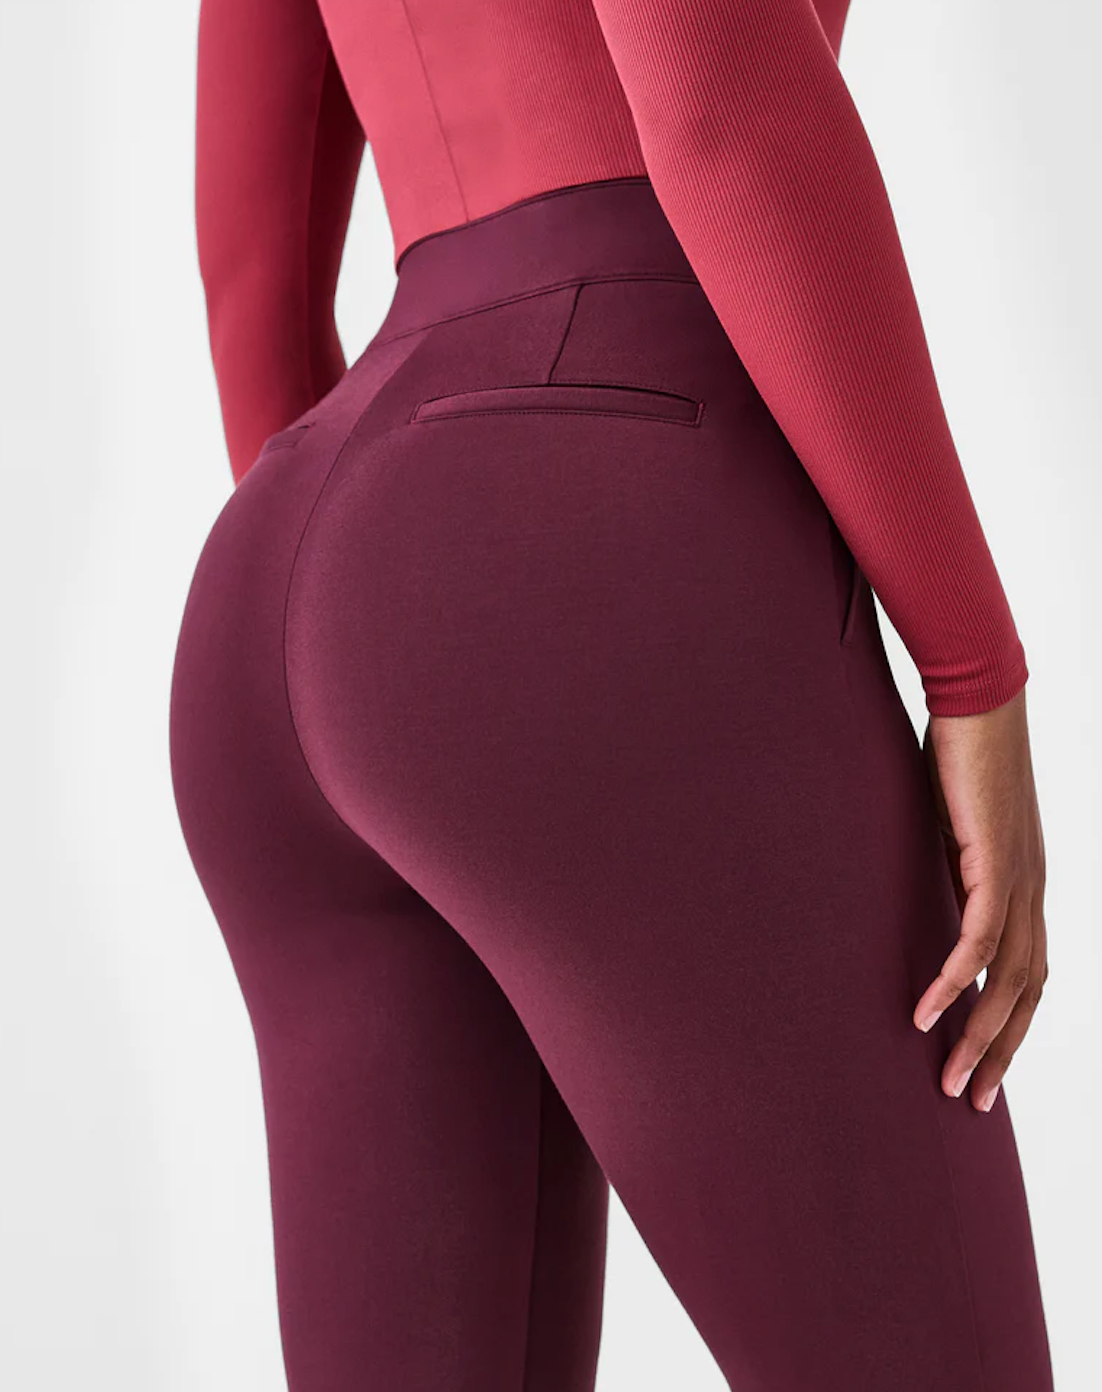 Buy SPANX The Perfect Pant, Slim Straight online